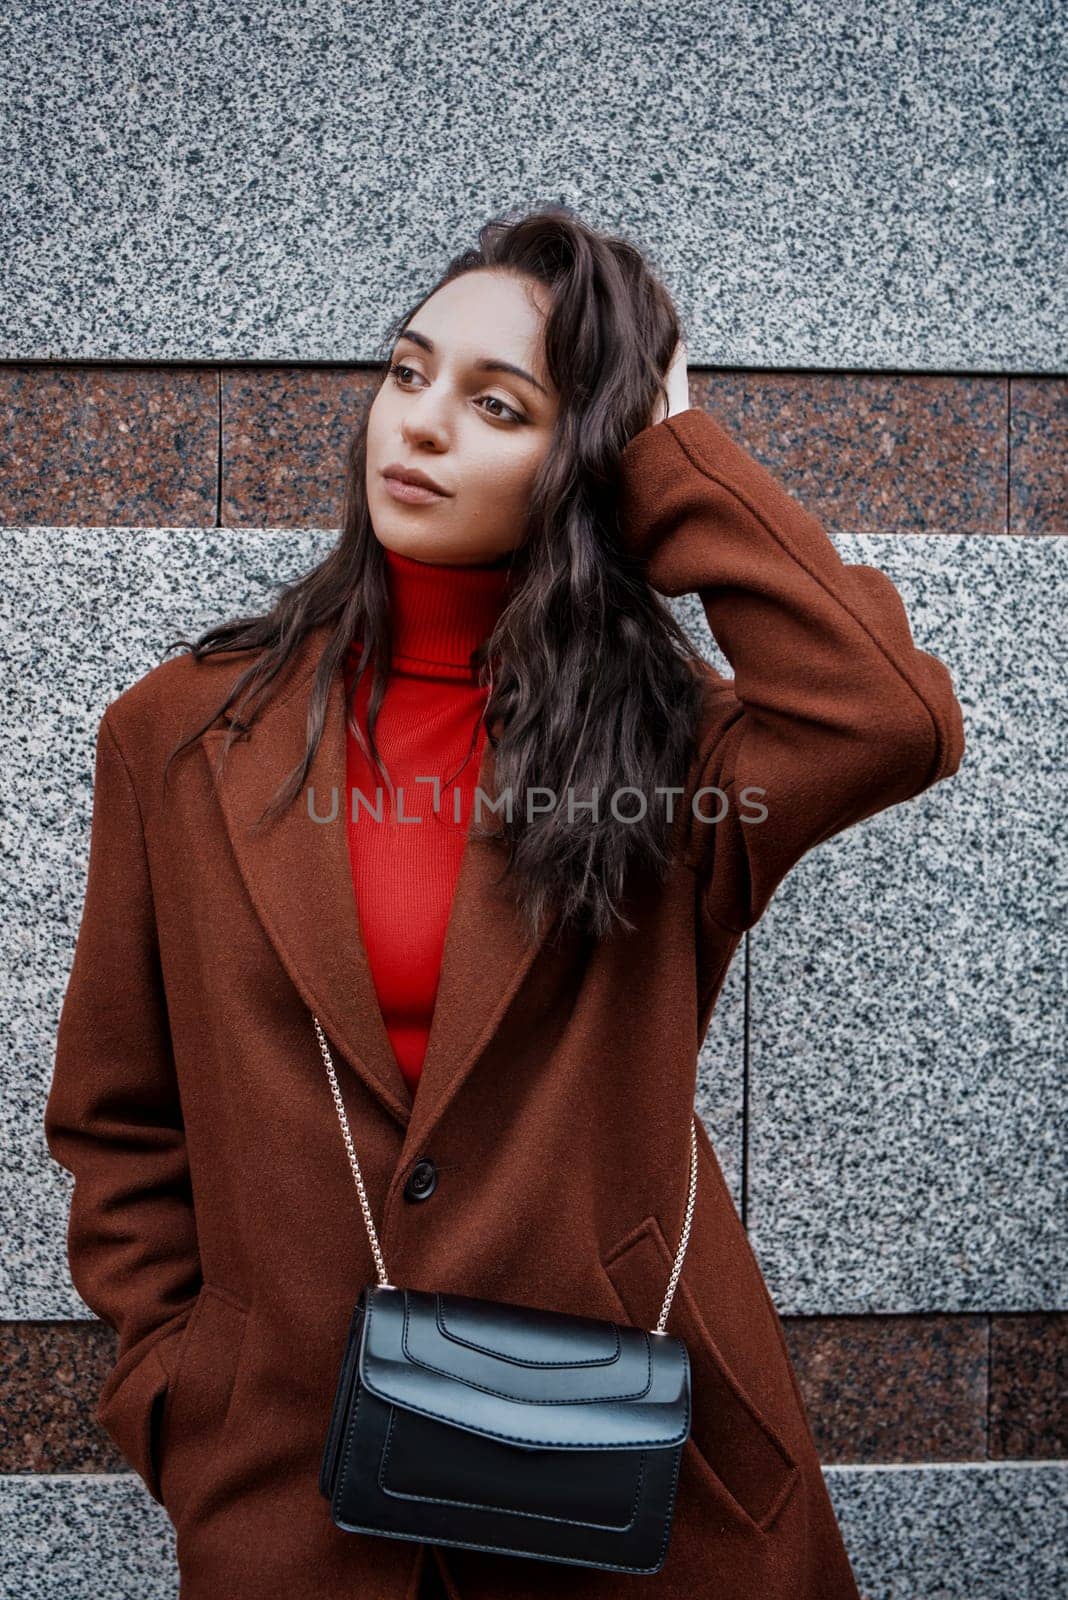 fashionable young woman in a brown coat and red sweater poses against the wall